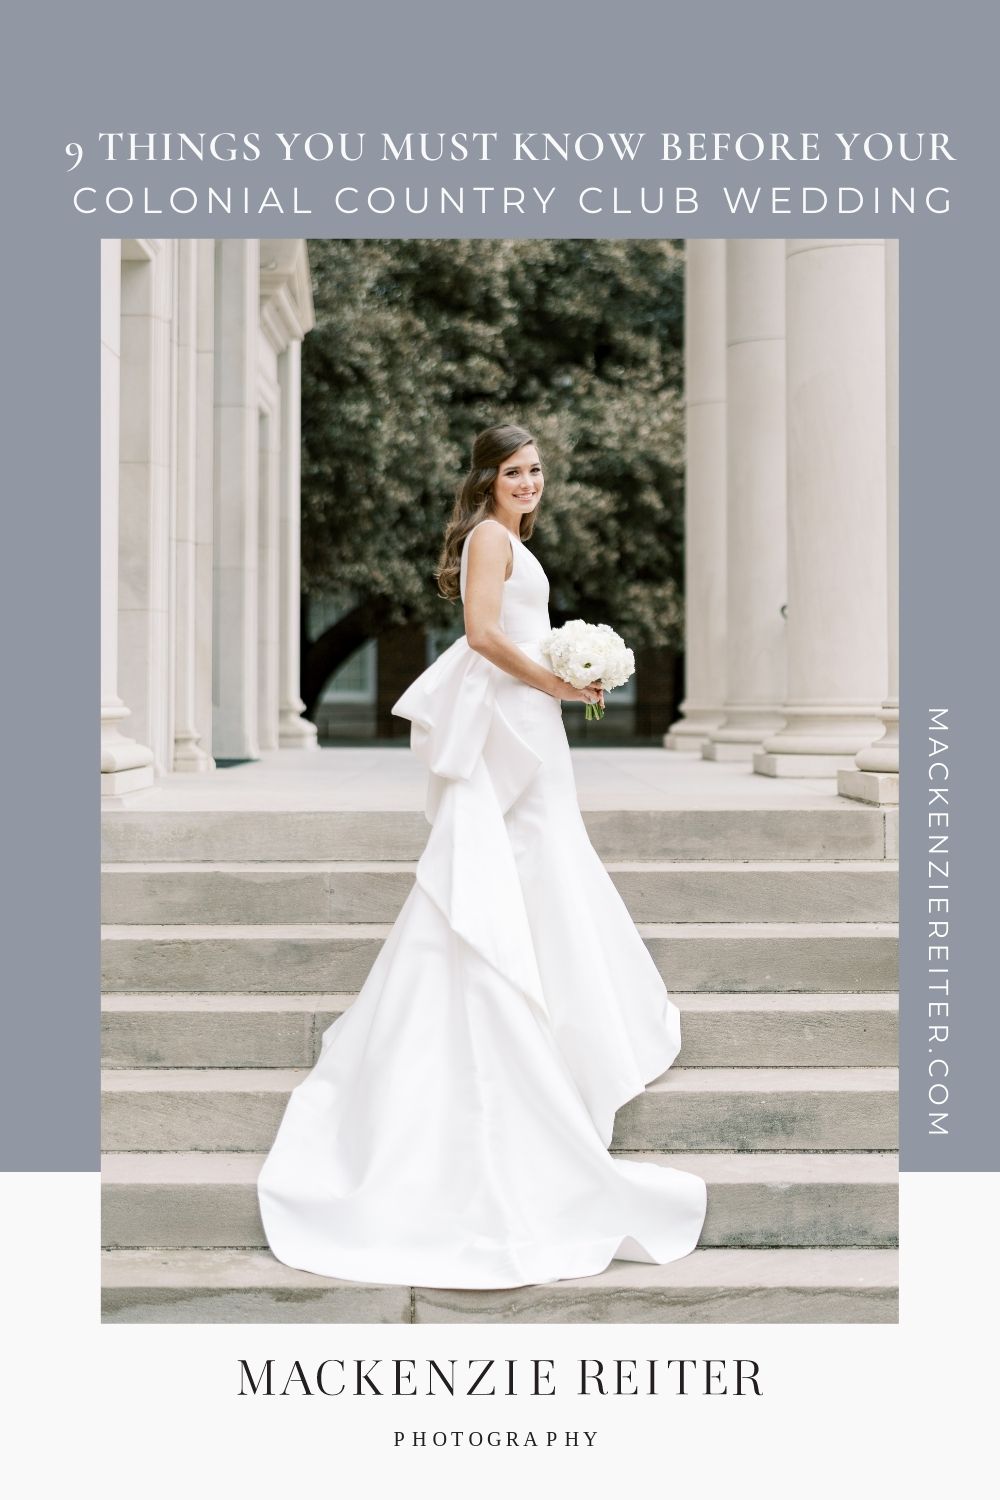 Bride poses for a portrait shot while in her bridal dress and holding up her bouquet at their country club wedding venue; image overlaid with text that reads 9 Things You Must Know Before Your Colonial Country Club Wedding